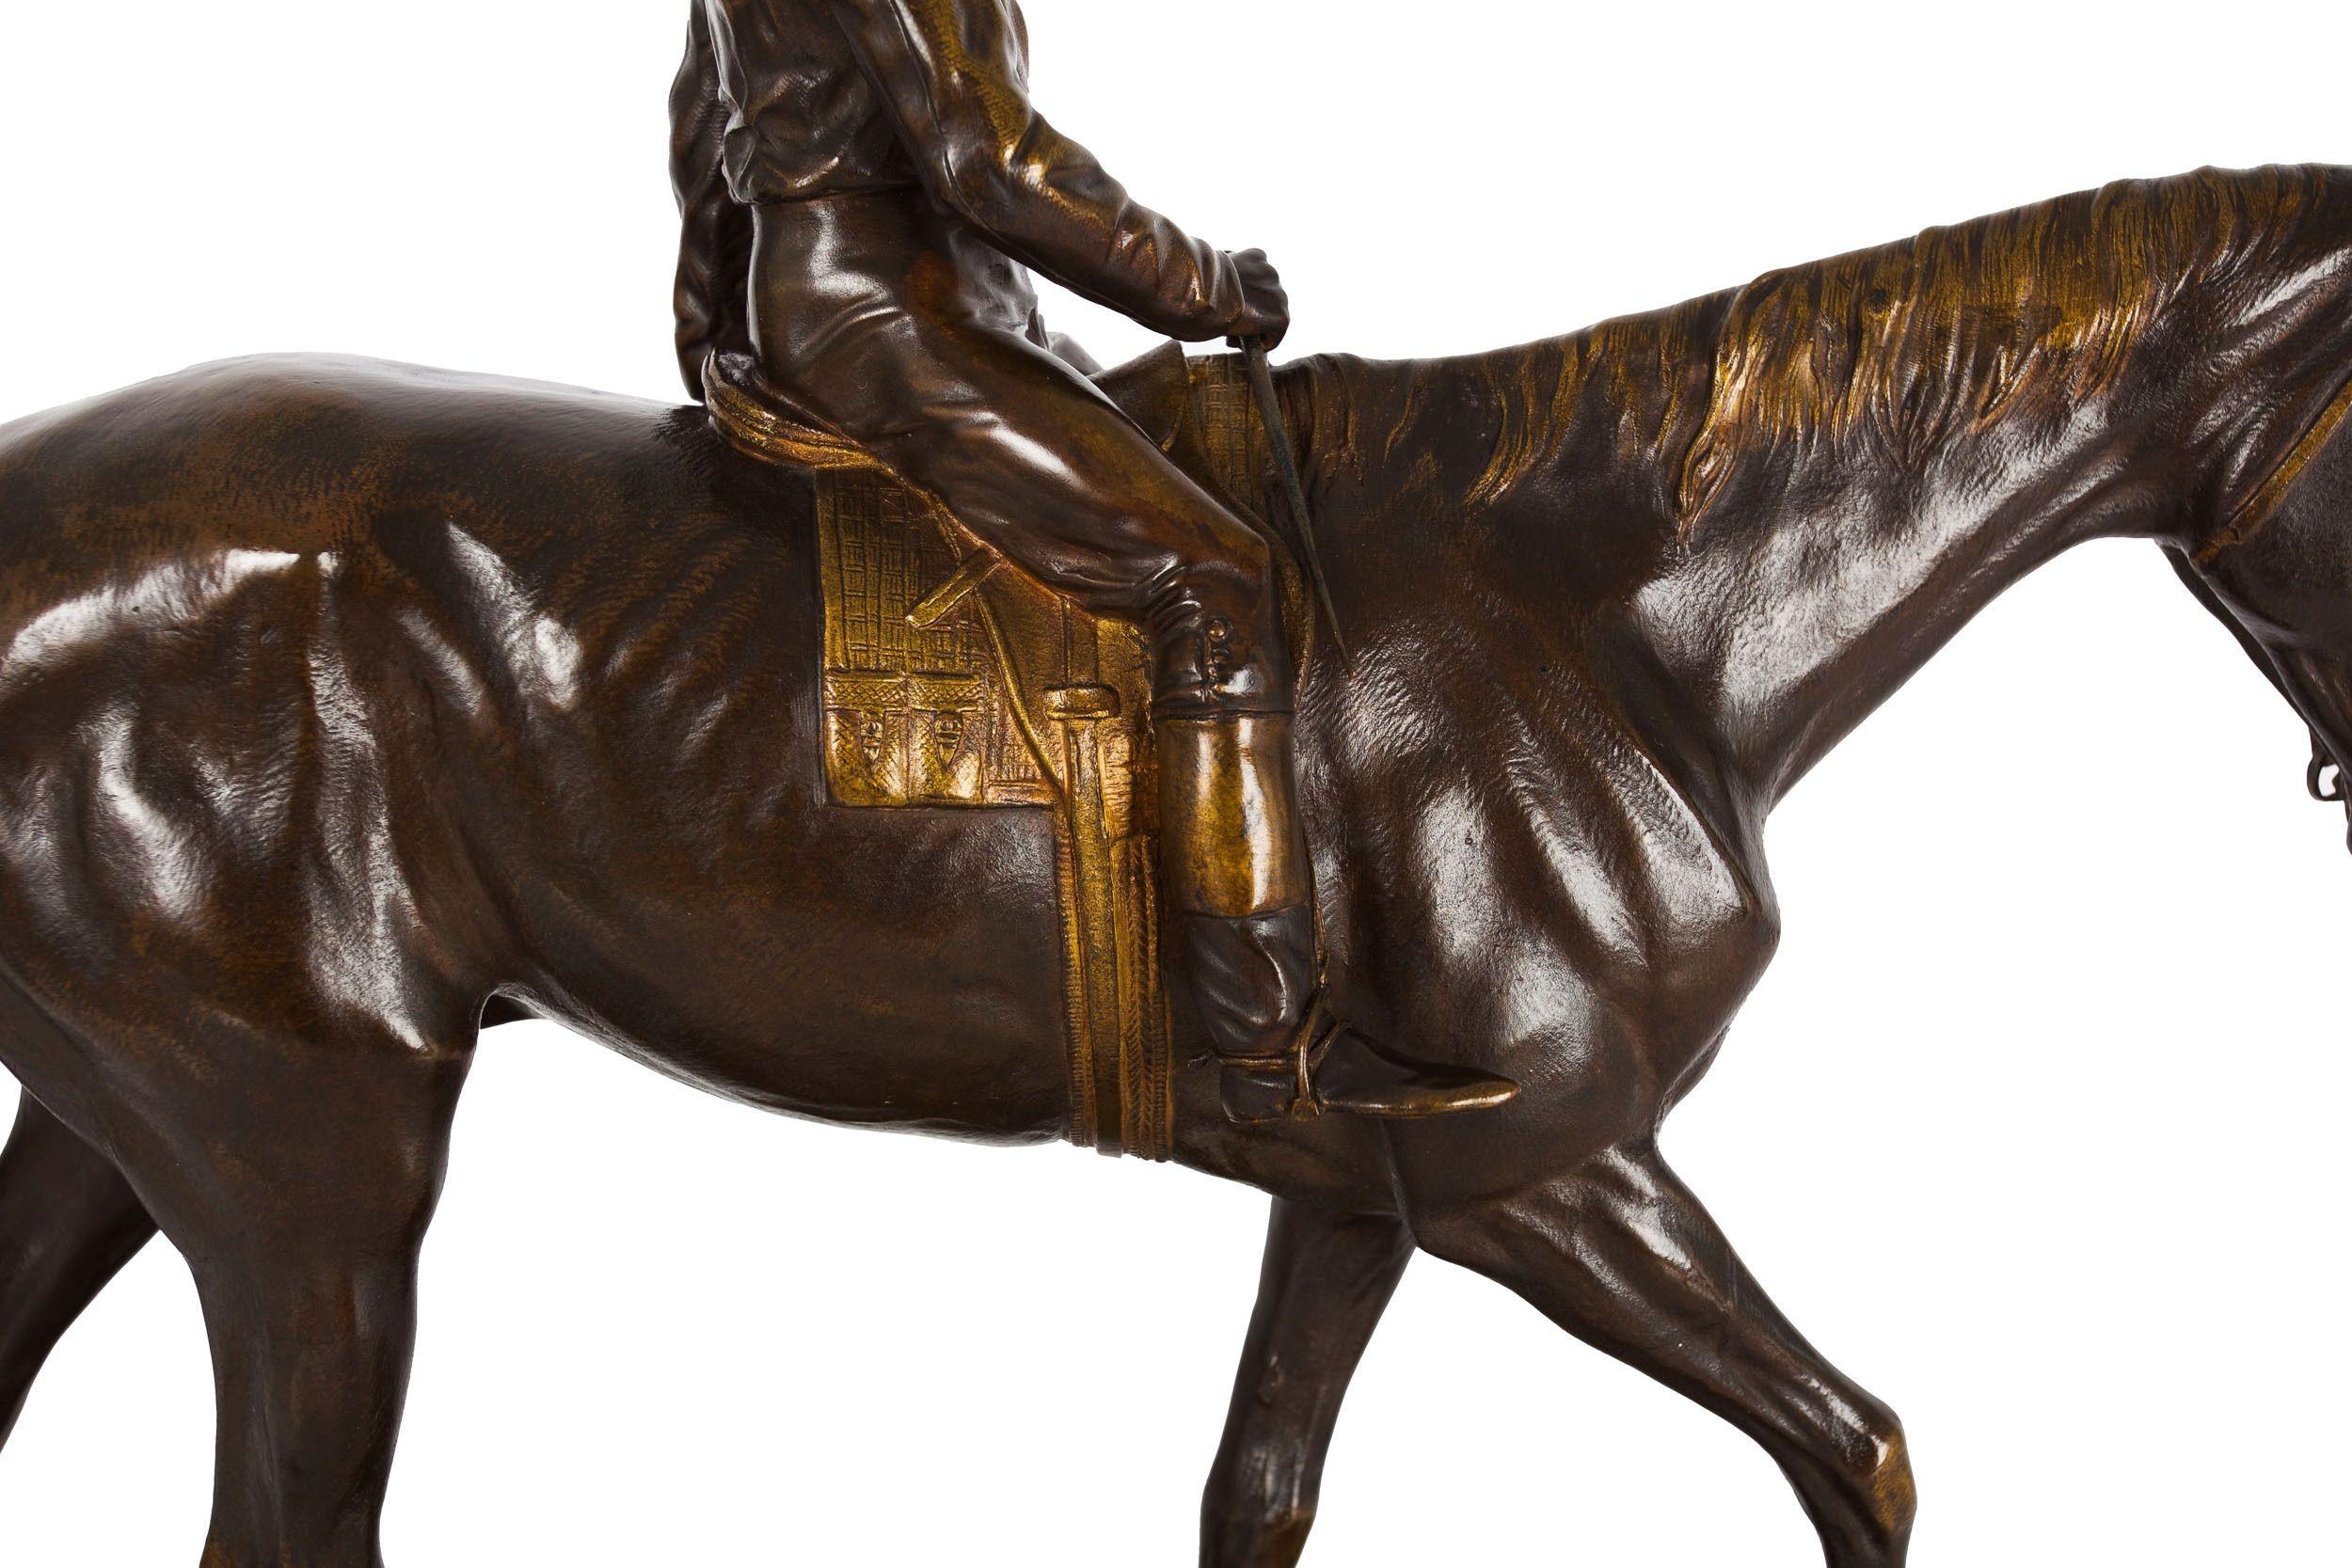 Rare and Fine Antique Bronze Sculpture “Horse and Jockey” by A.E. Dubucand In Good Condition For Sale In Shippensburg, PA